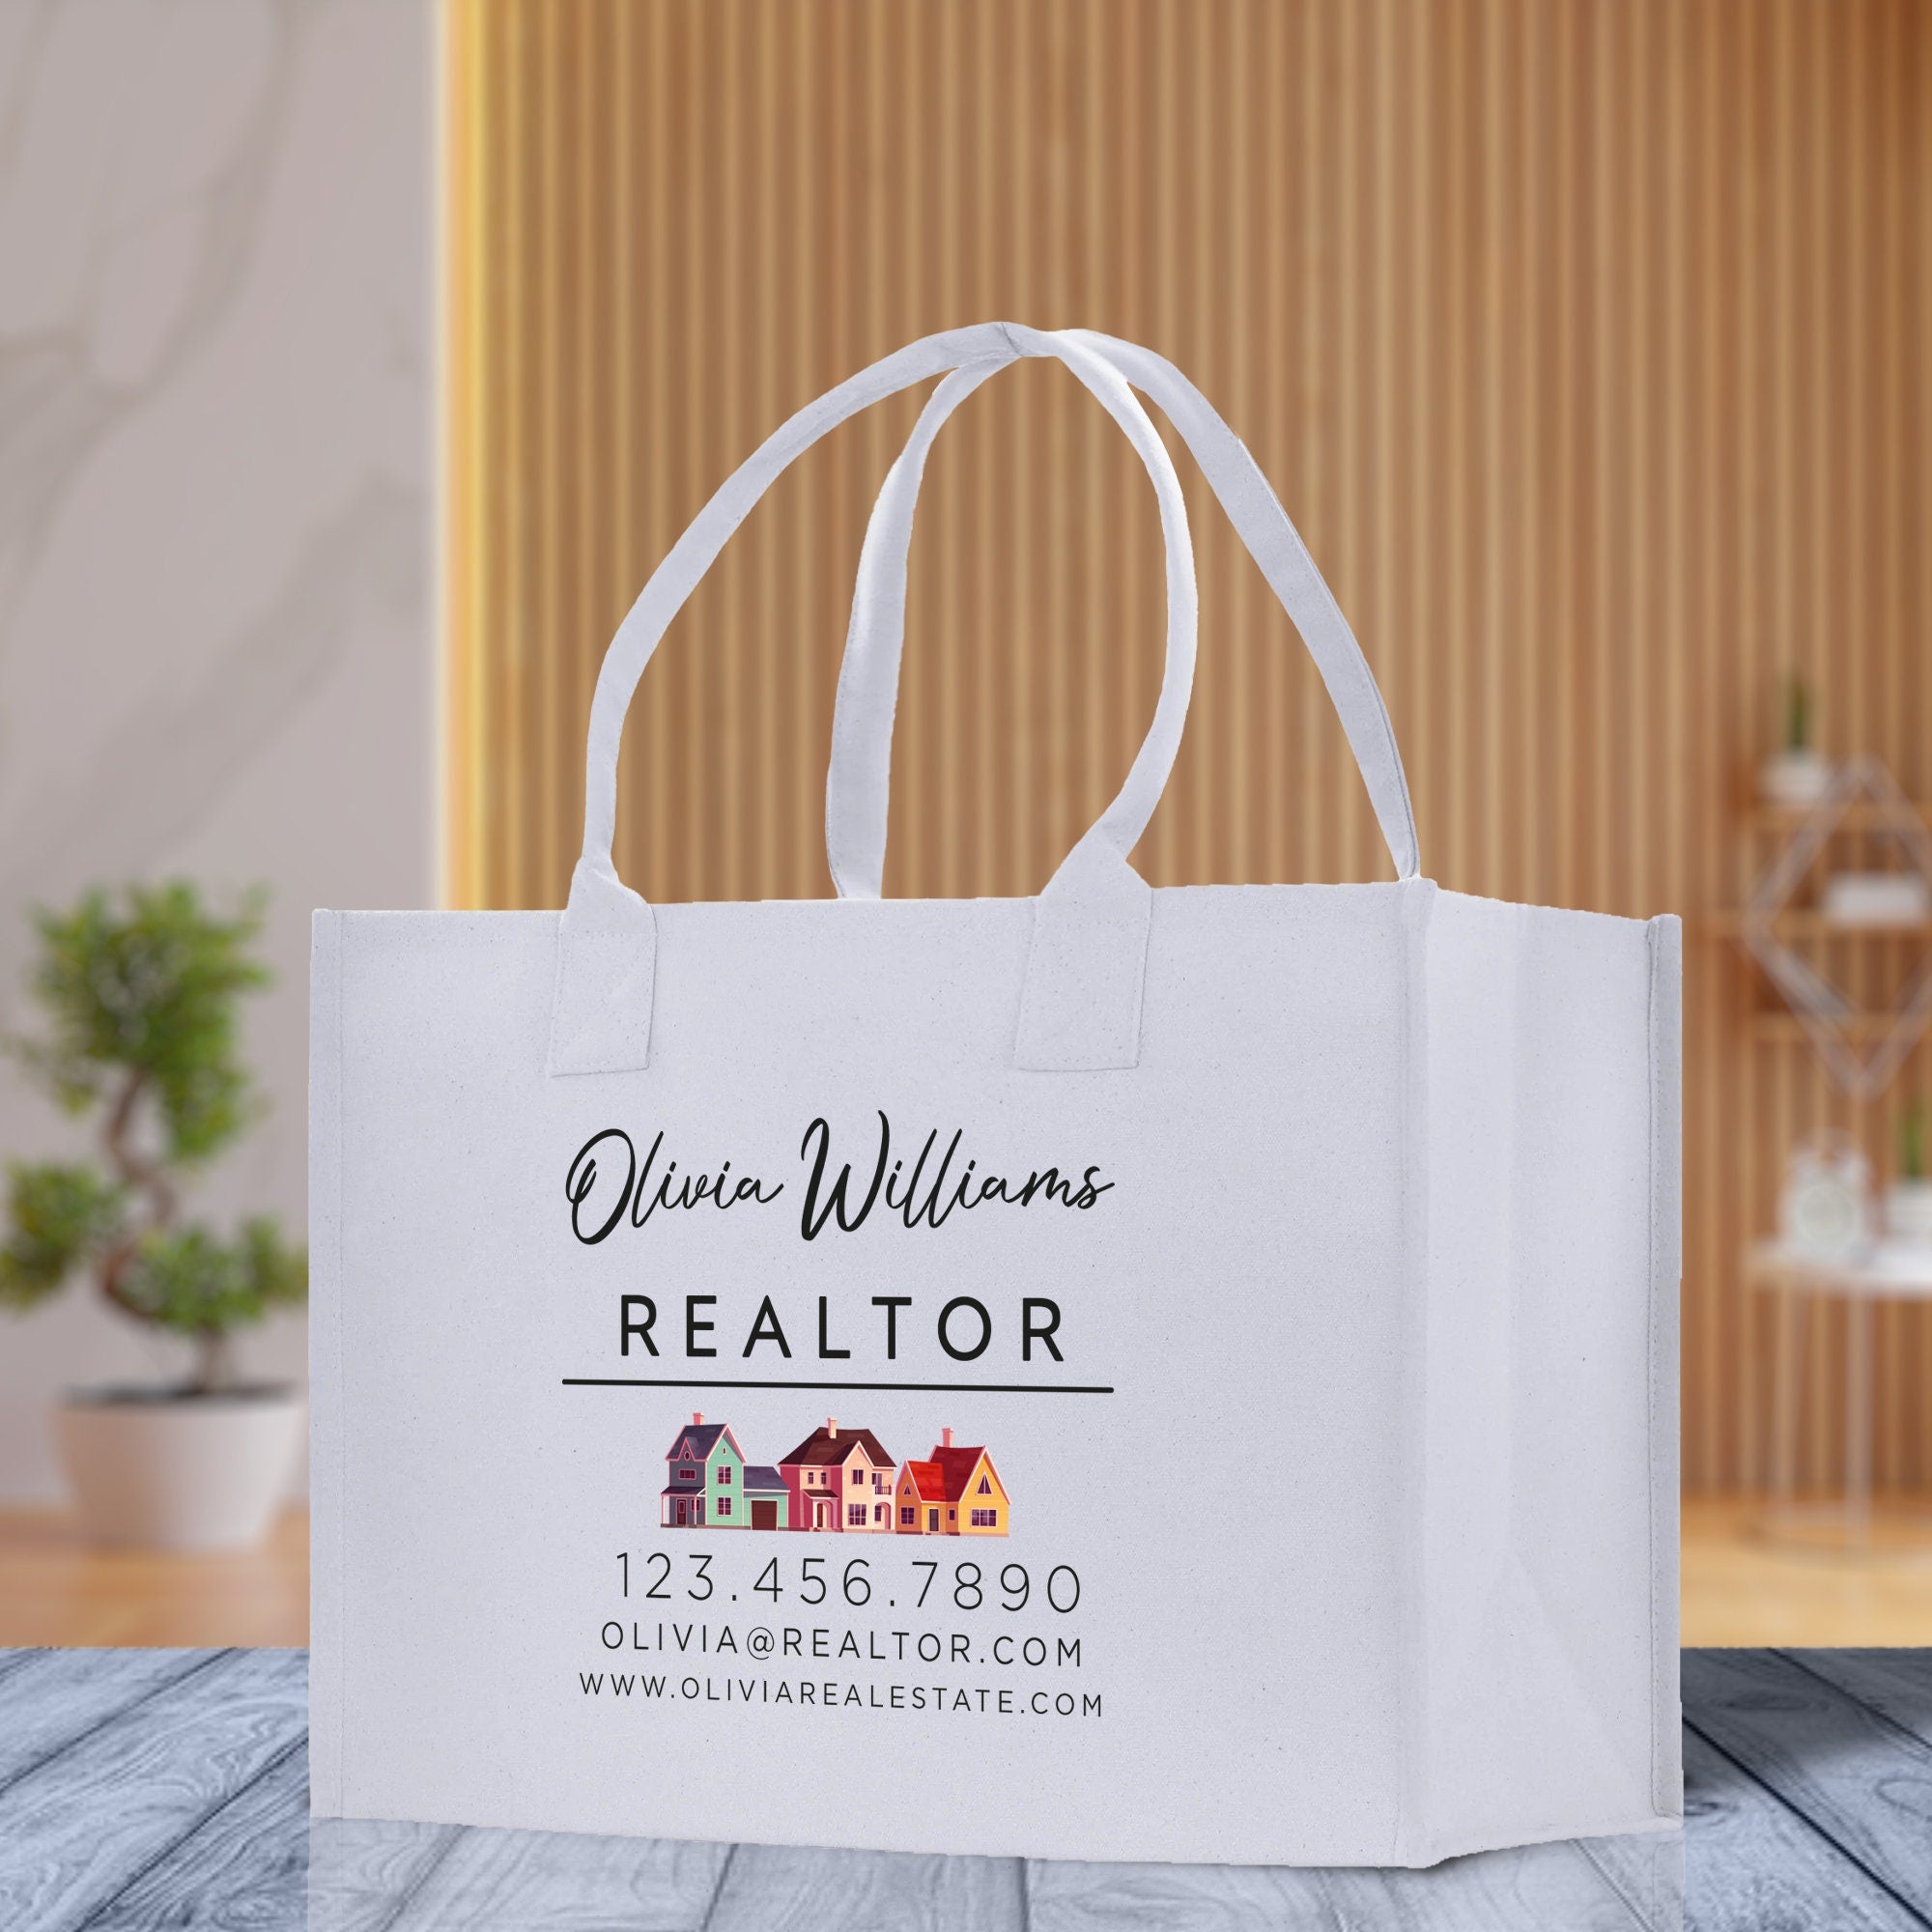 a white bag with a realtor logo on it